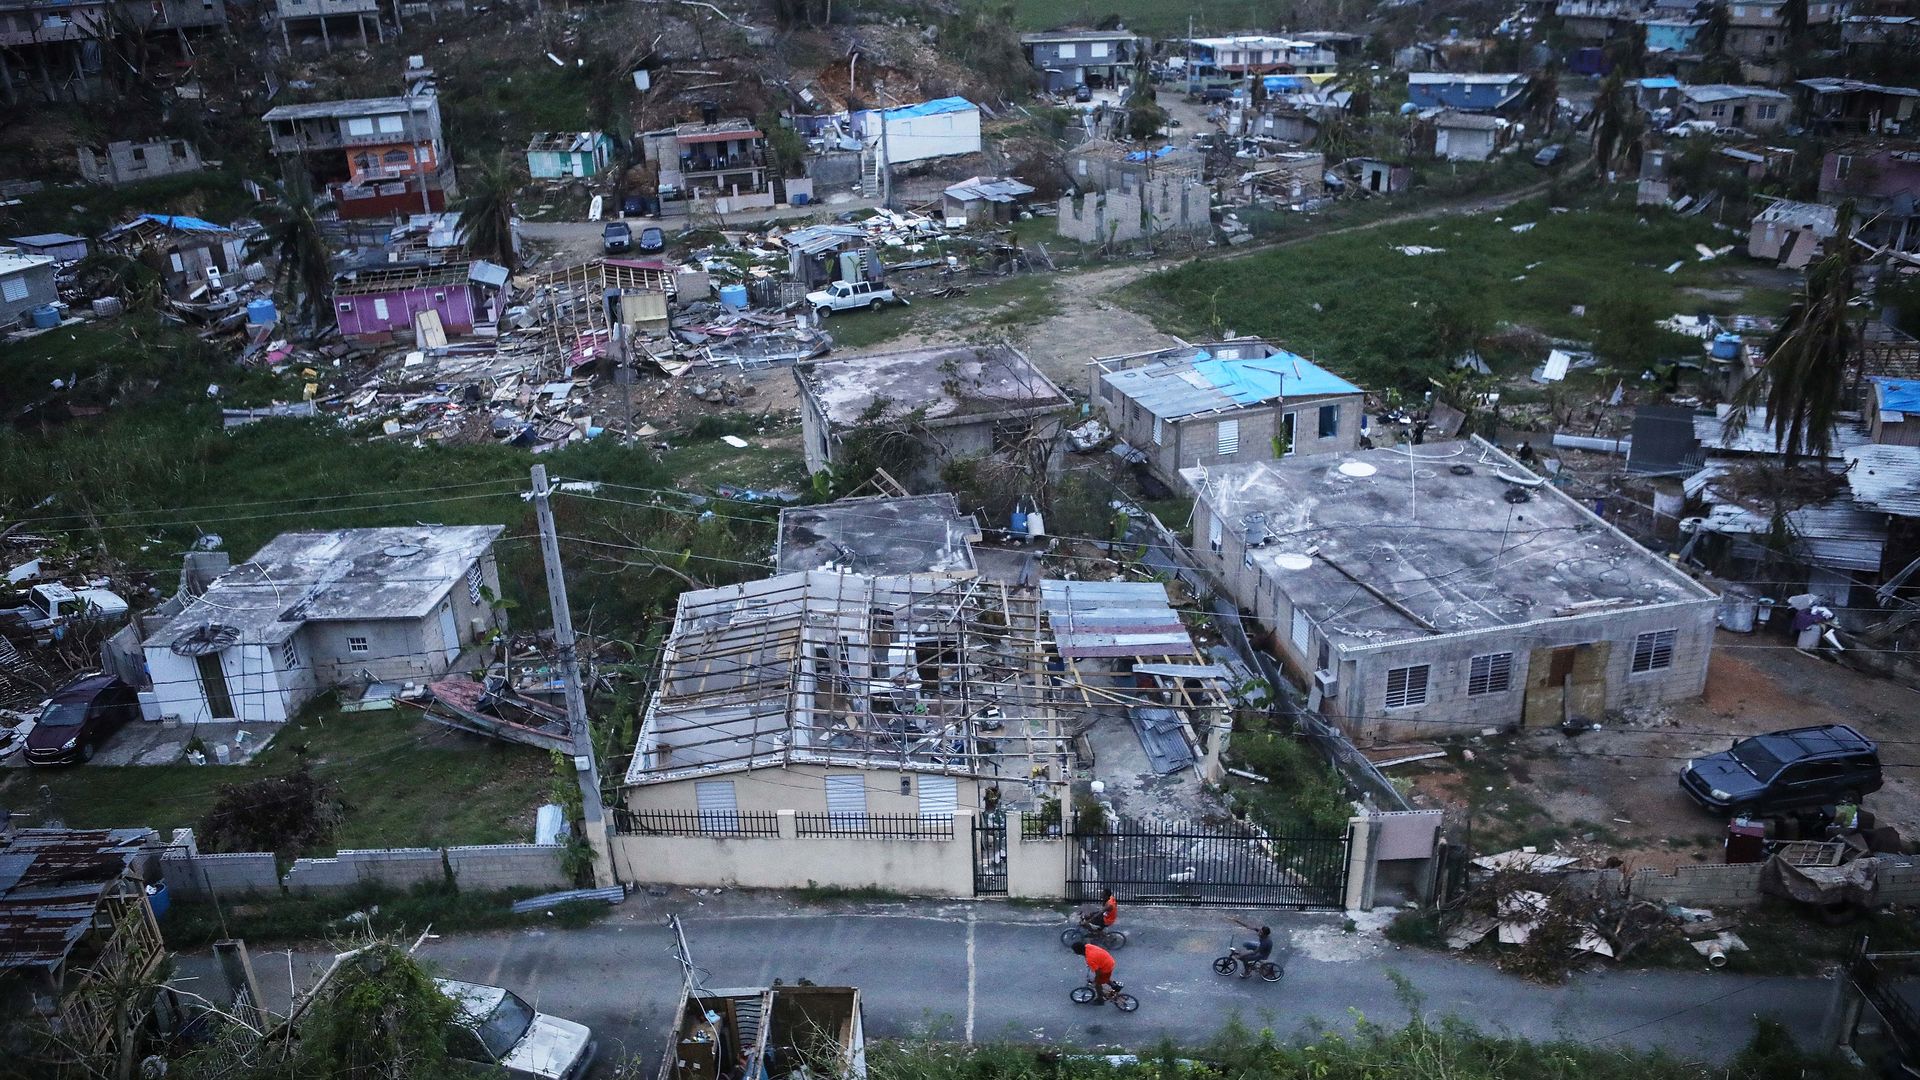 Two weeks after Hurricane Maria swept through Puerto Rico in 2017. 